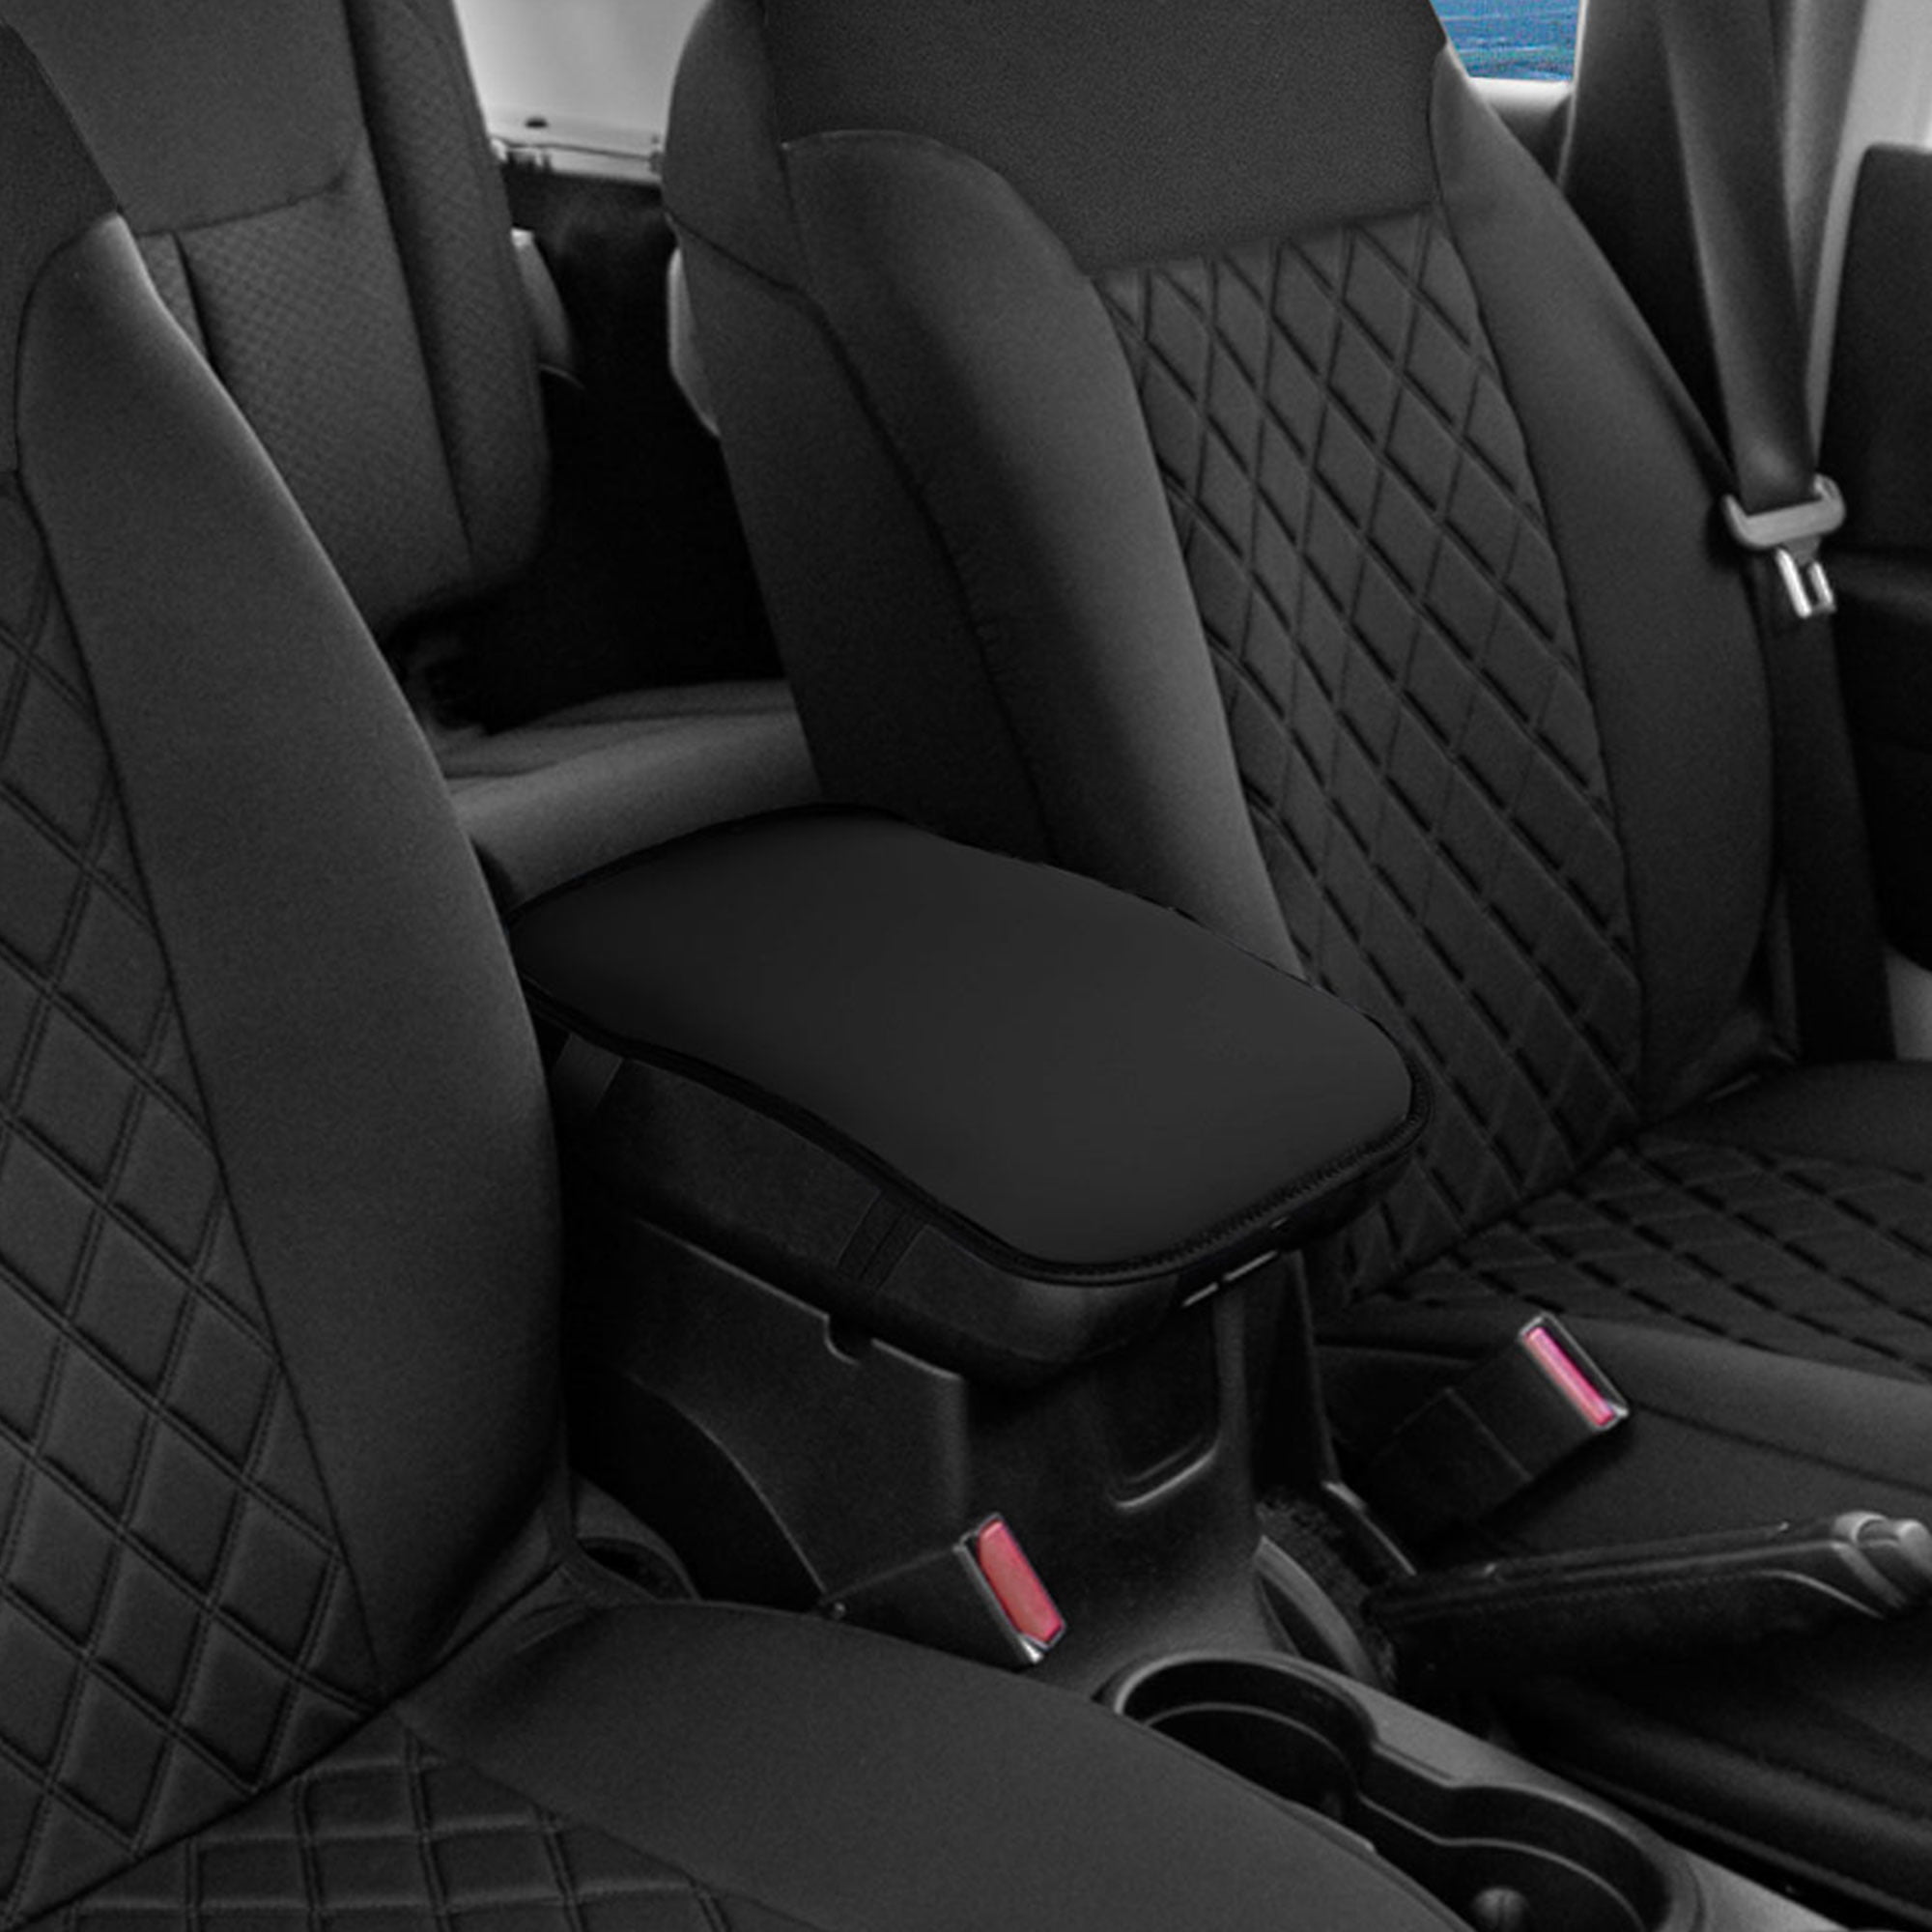 Heavy Duty Kick Mats, Black (2 Pack) - Best Car Seat Back Protector,  Reversible Backseat Child Kick Guard Protects Automotive Leather Fabric  from Dirt